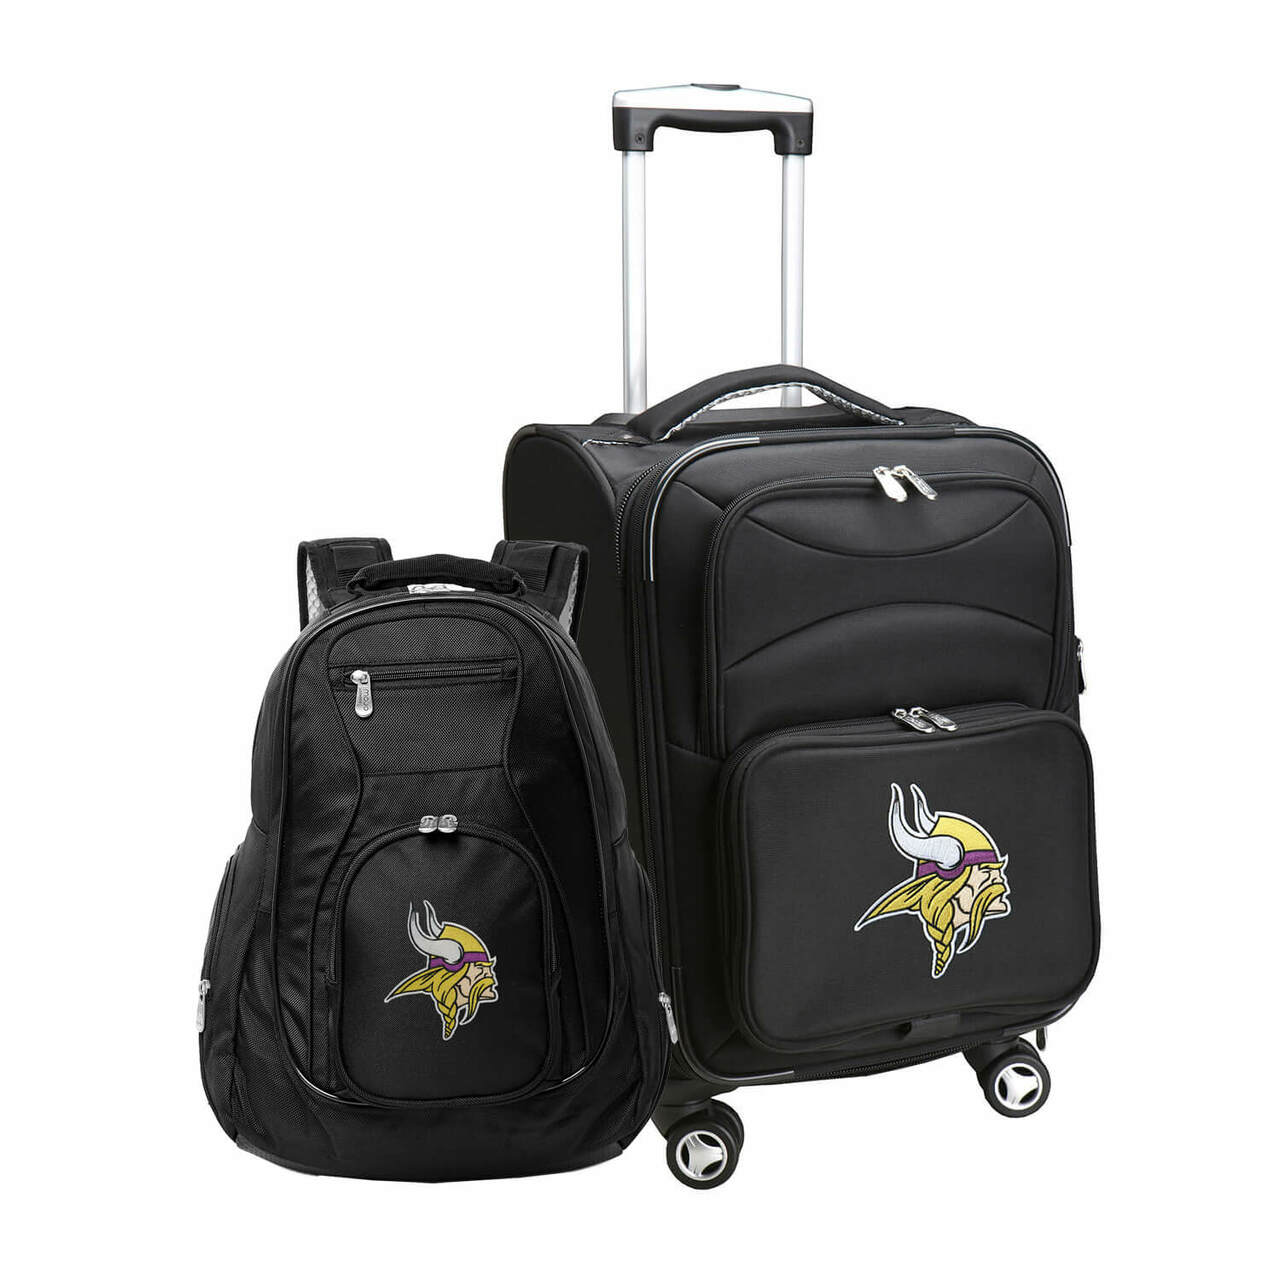 Minnesota Vikings Spinner Carry-On Luggage and Backpack Set